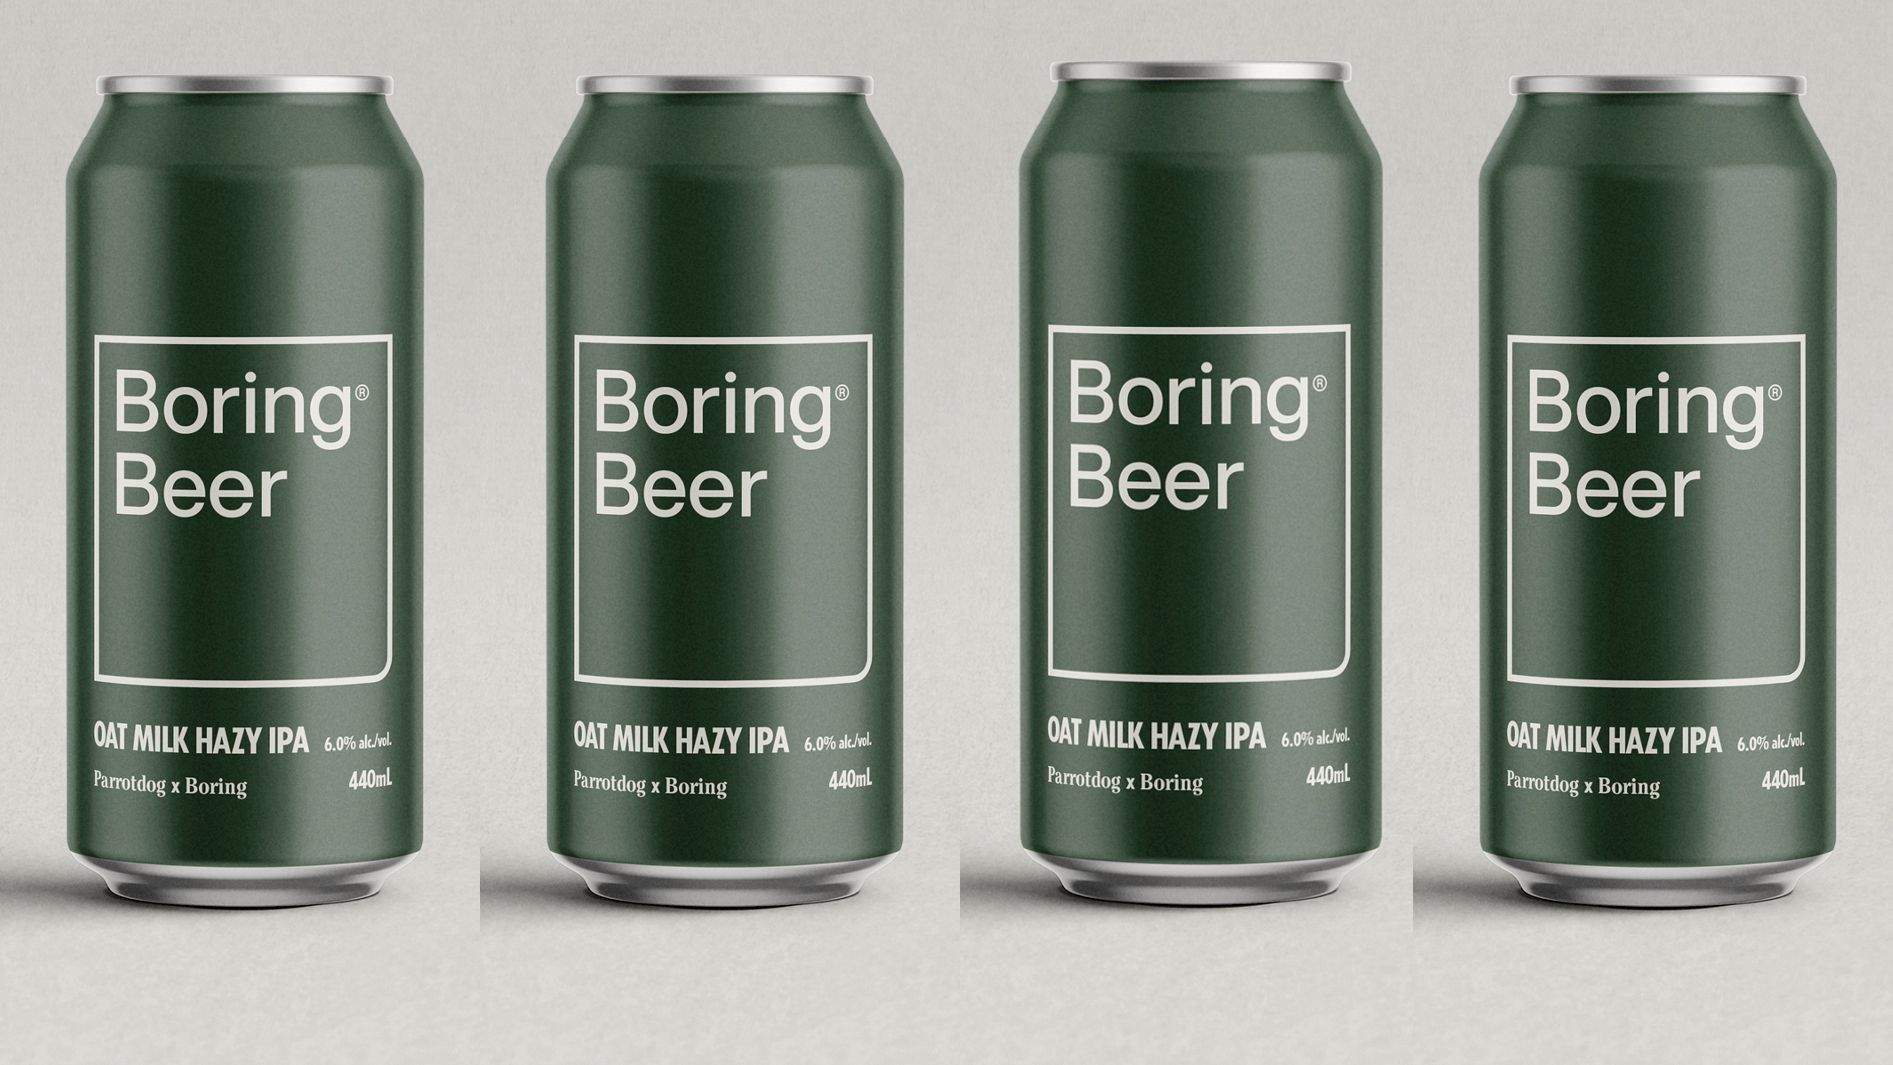 New Zealand Brands Boring Oat Milk and Parrotdog Brewery Have Teamed Up to Make an Oat Milk Beer